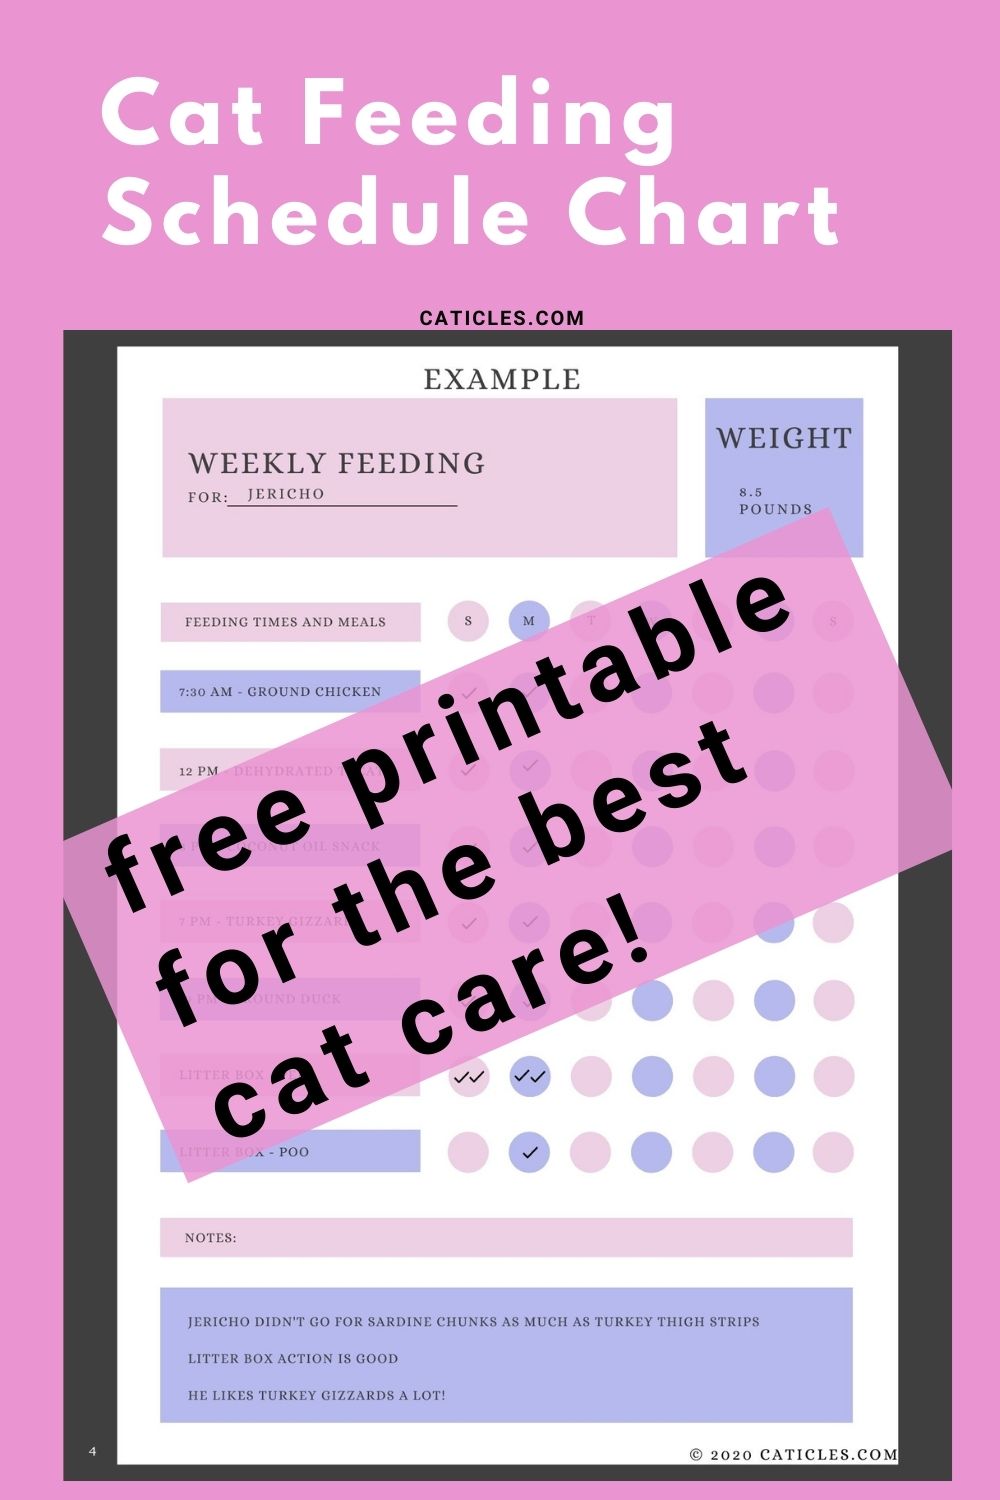 cat-feeding-schedule-chart-how-many-times-to-feed-guide-caticles